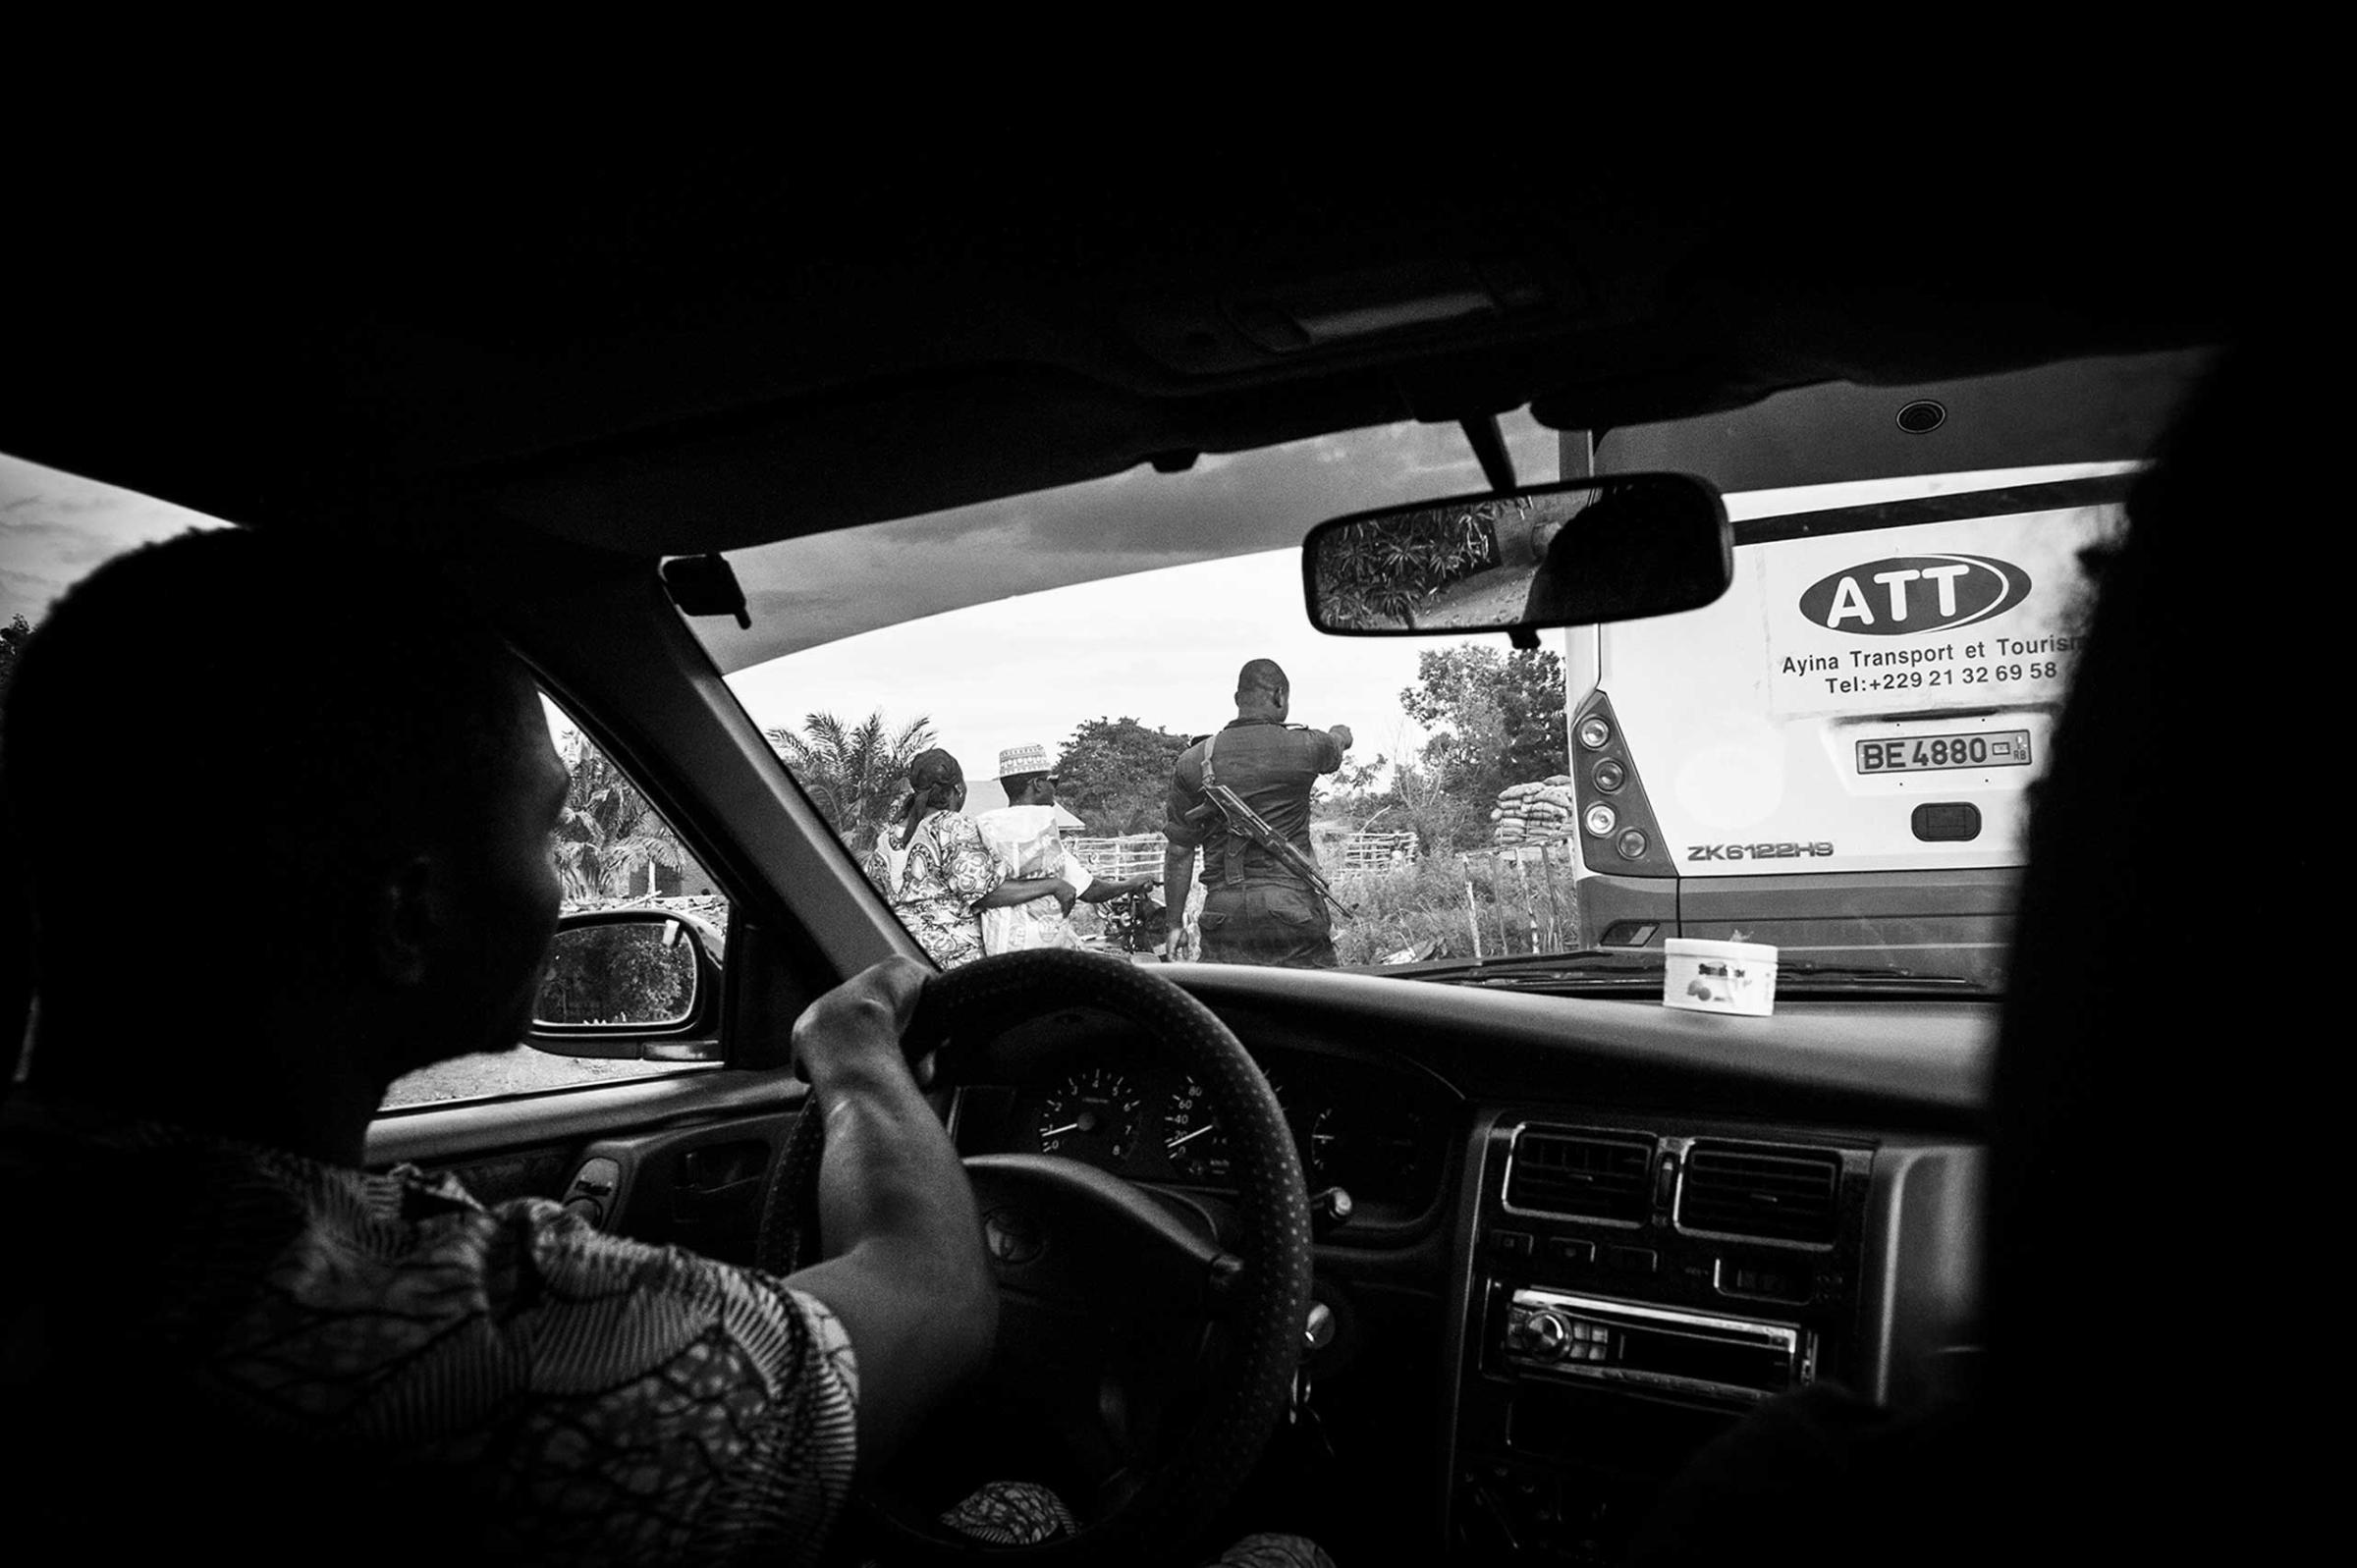 An agent of the gendarmerie in roadside check. The local authorities, both the Nigerian and the Beninese, profit from the illegal trafficking of petrol. The unregulated transportation of fuel is an illegal but frequent activity. The roadside checks of the gendarmerie and the army turn a blind eye or extort the drivers, who have no choice but to pay to ensure that the others don’t seize their goods.